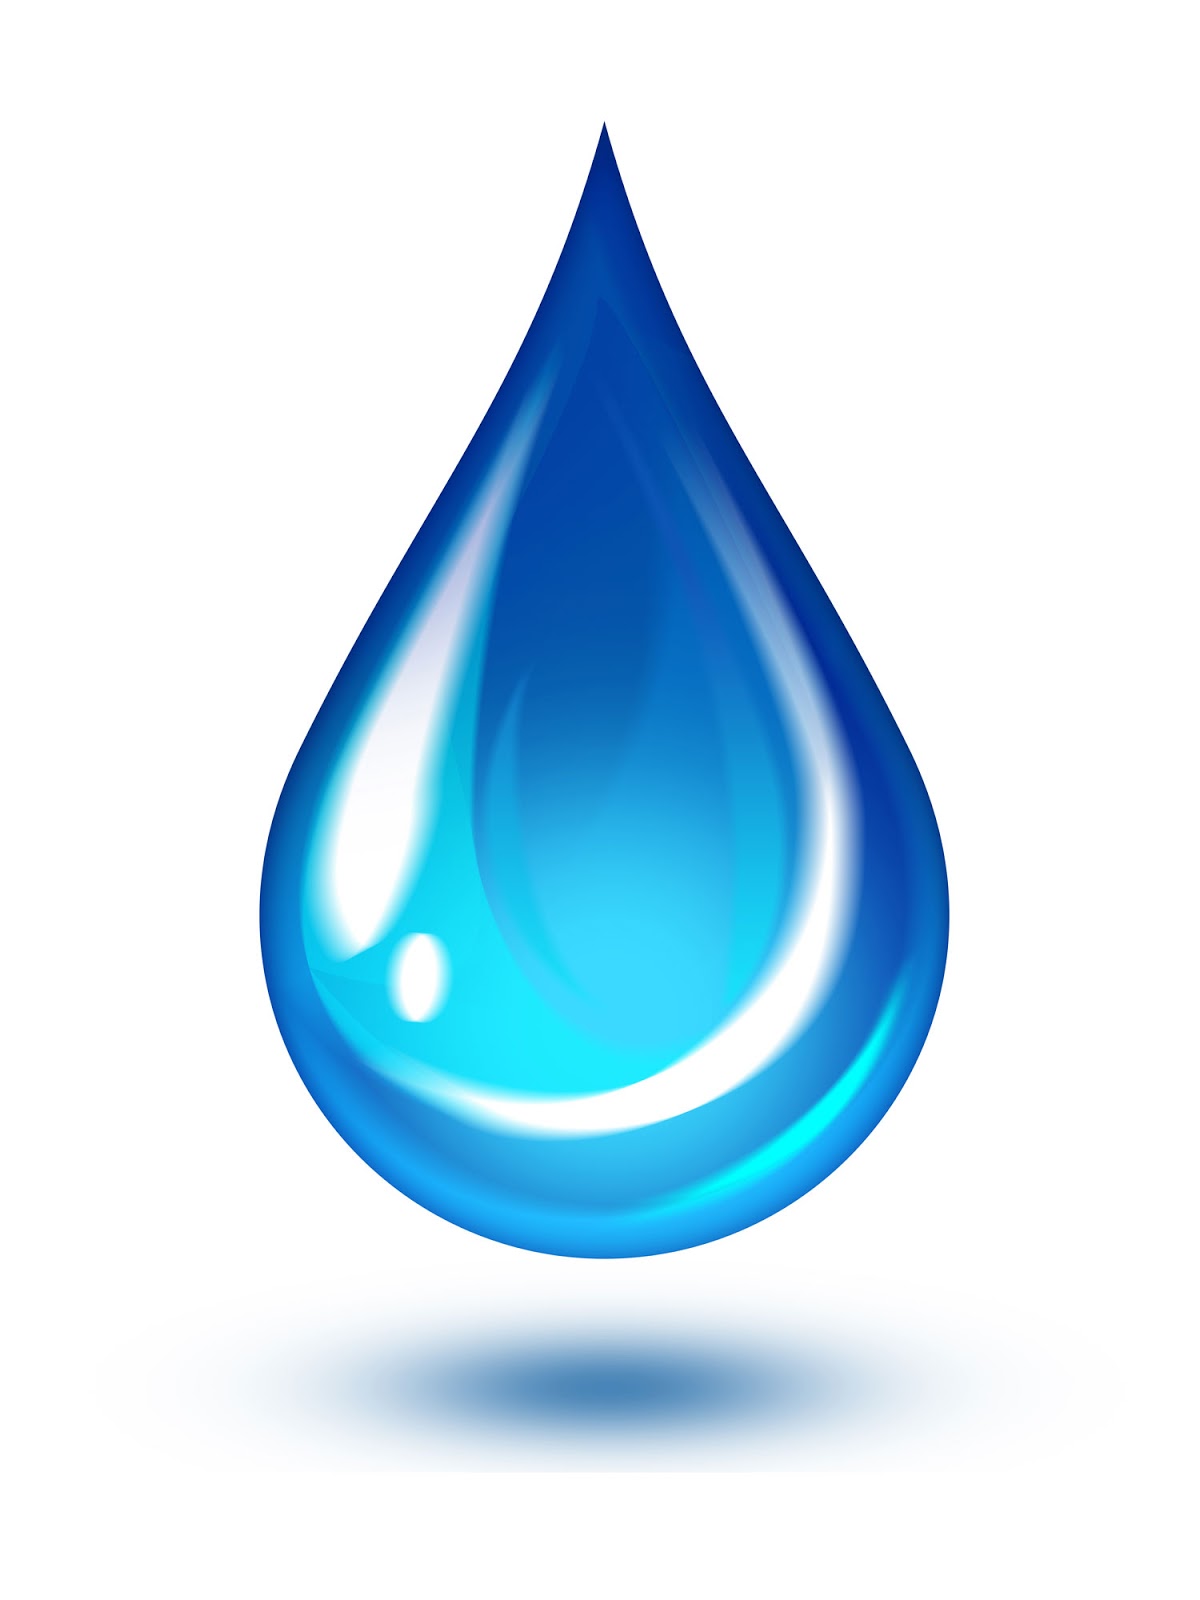 Water Droplets Gif_Water Pollution_Drop Water